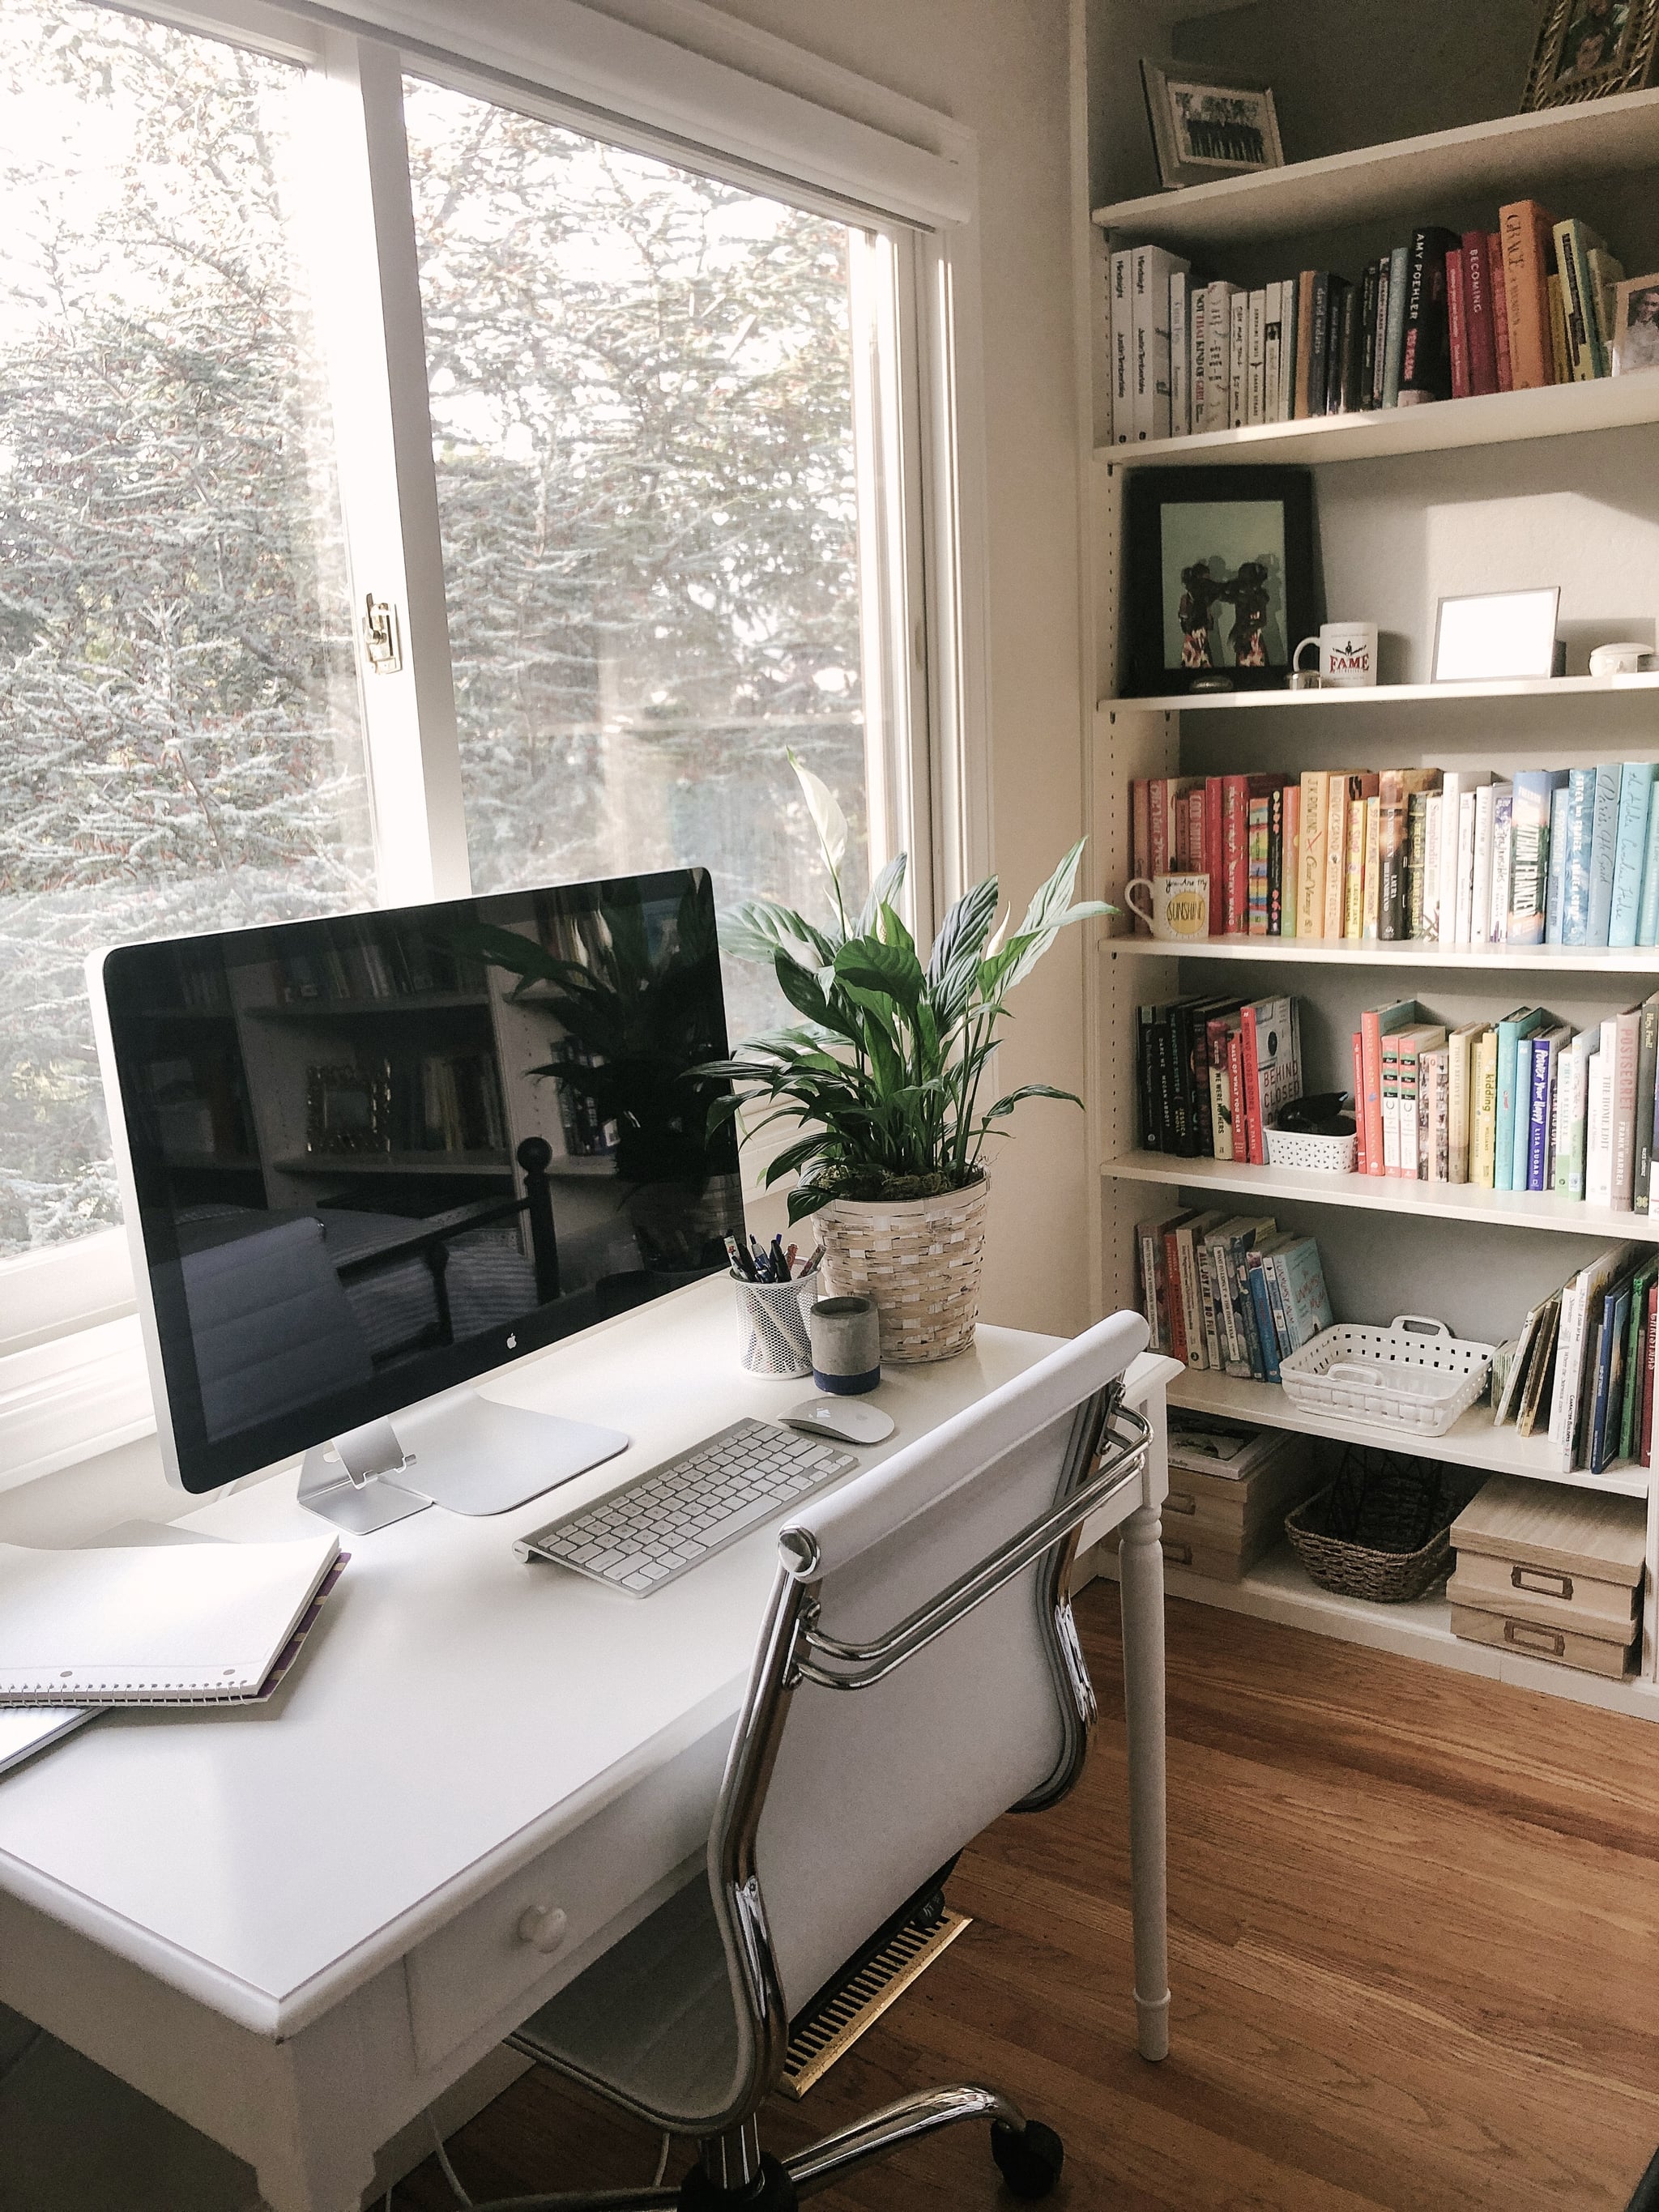 The Light and Bright Office | 10 POPSUGAR Editors Share How They're Making  It Work With At-Home Offices | POPSUGAR Home Photo 7